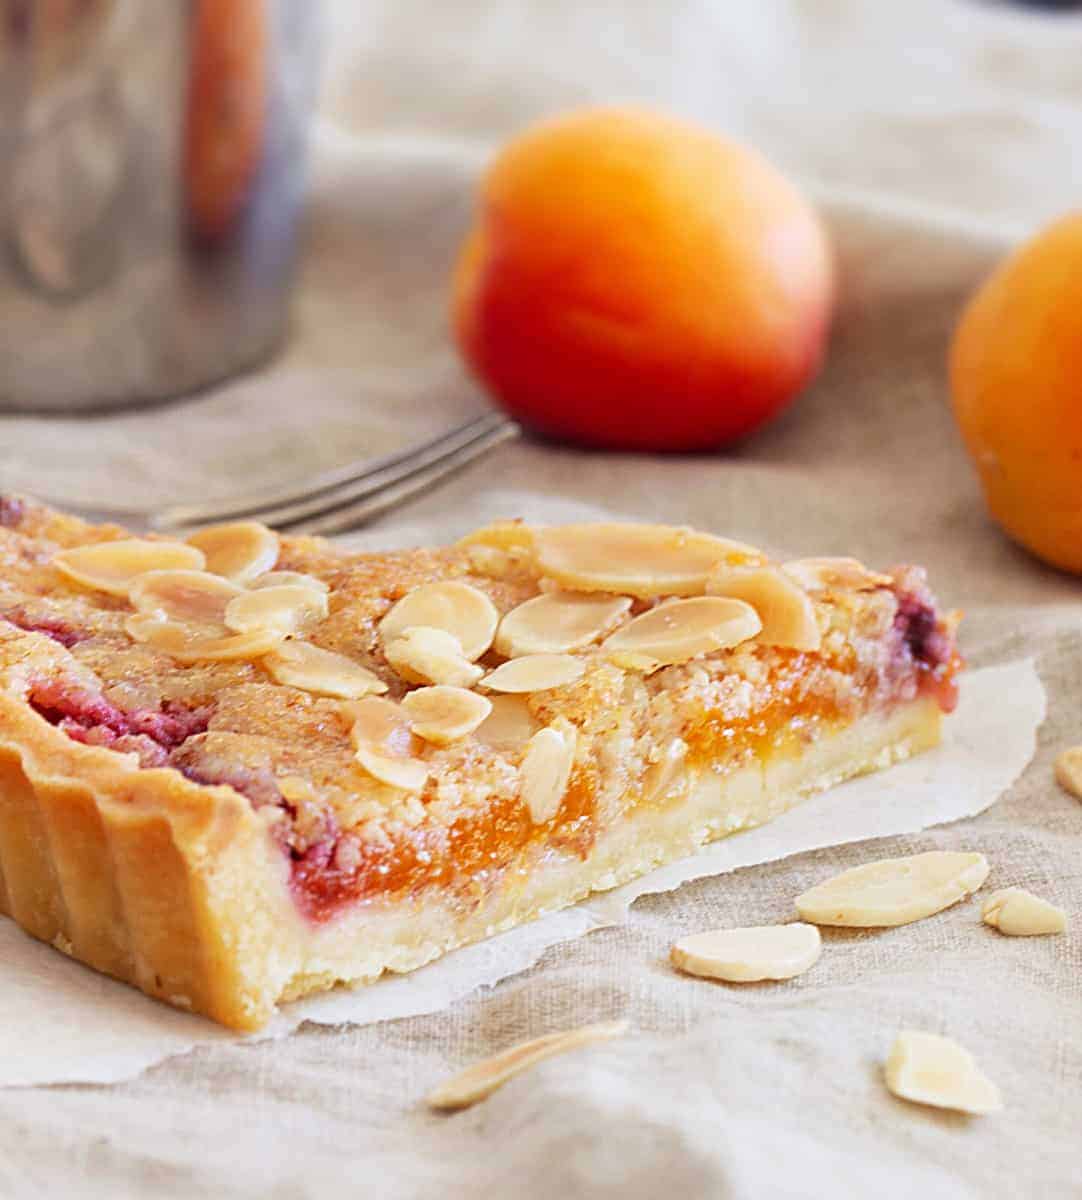 Slice of apricot tart on beige cloth, whole apricots, loose almonds